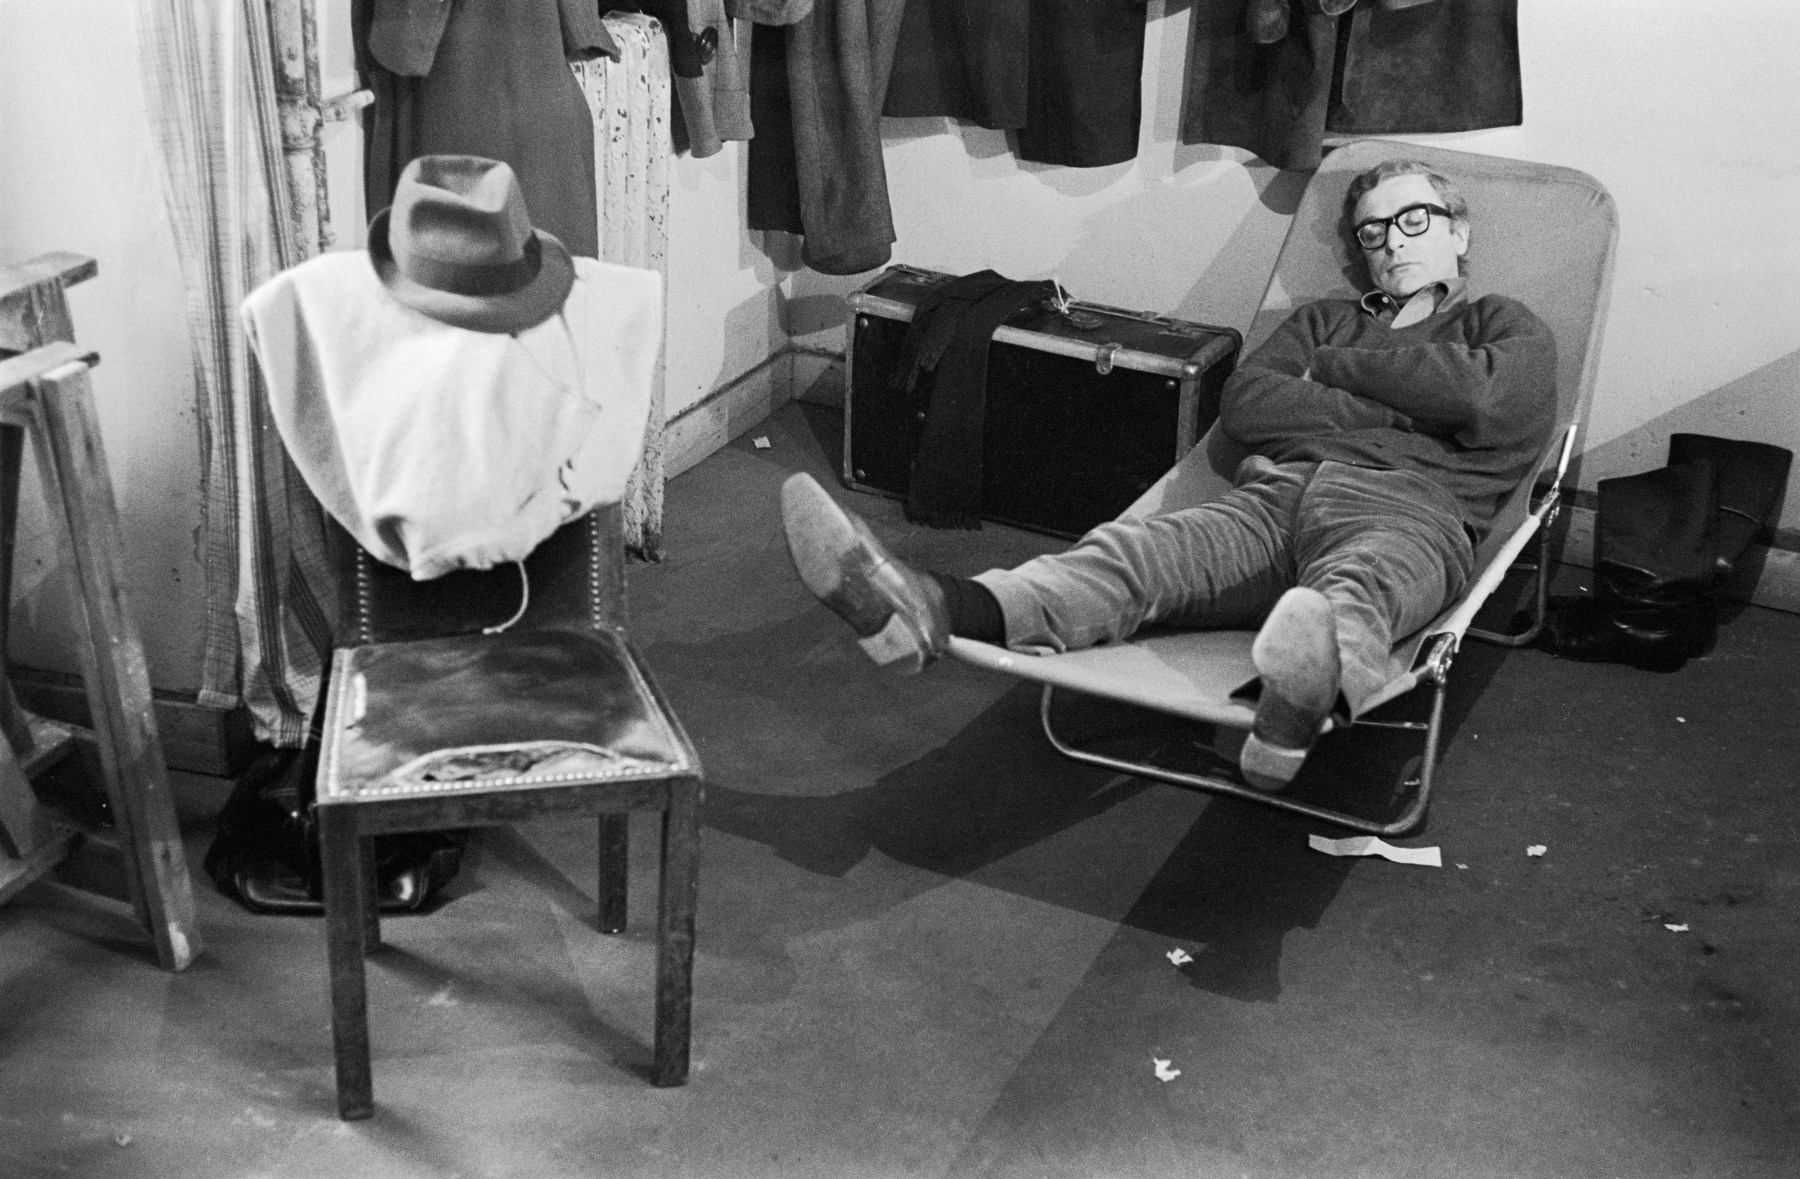 Michael Caine takes a nap during the filming of “Woman Times Seven” by Vittorio De Sica in Paris, 1967. <br><br><meta charset="utf-8">By Terry O'Neill, courtesy of ACC Art Books